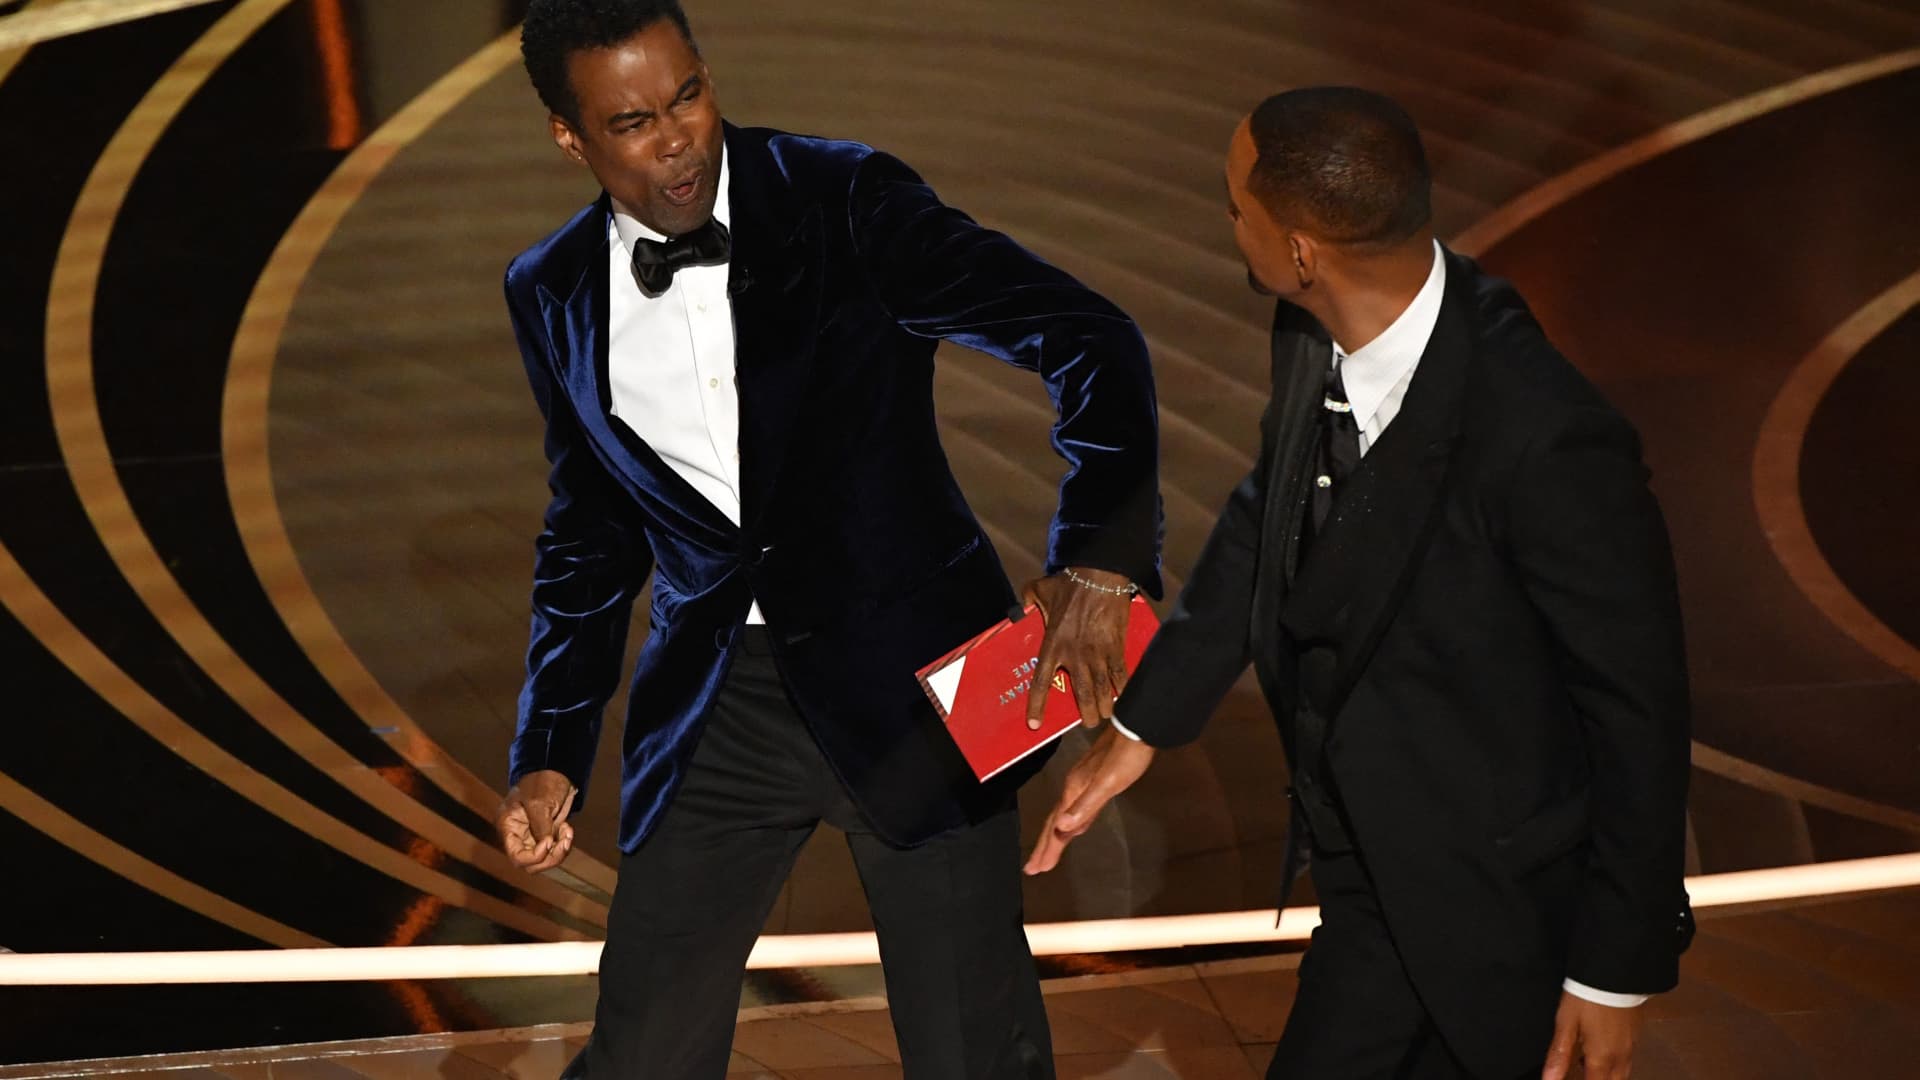 The party failed even before Will Smith slapped Chris Rock